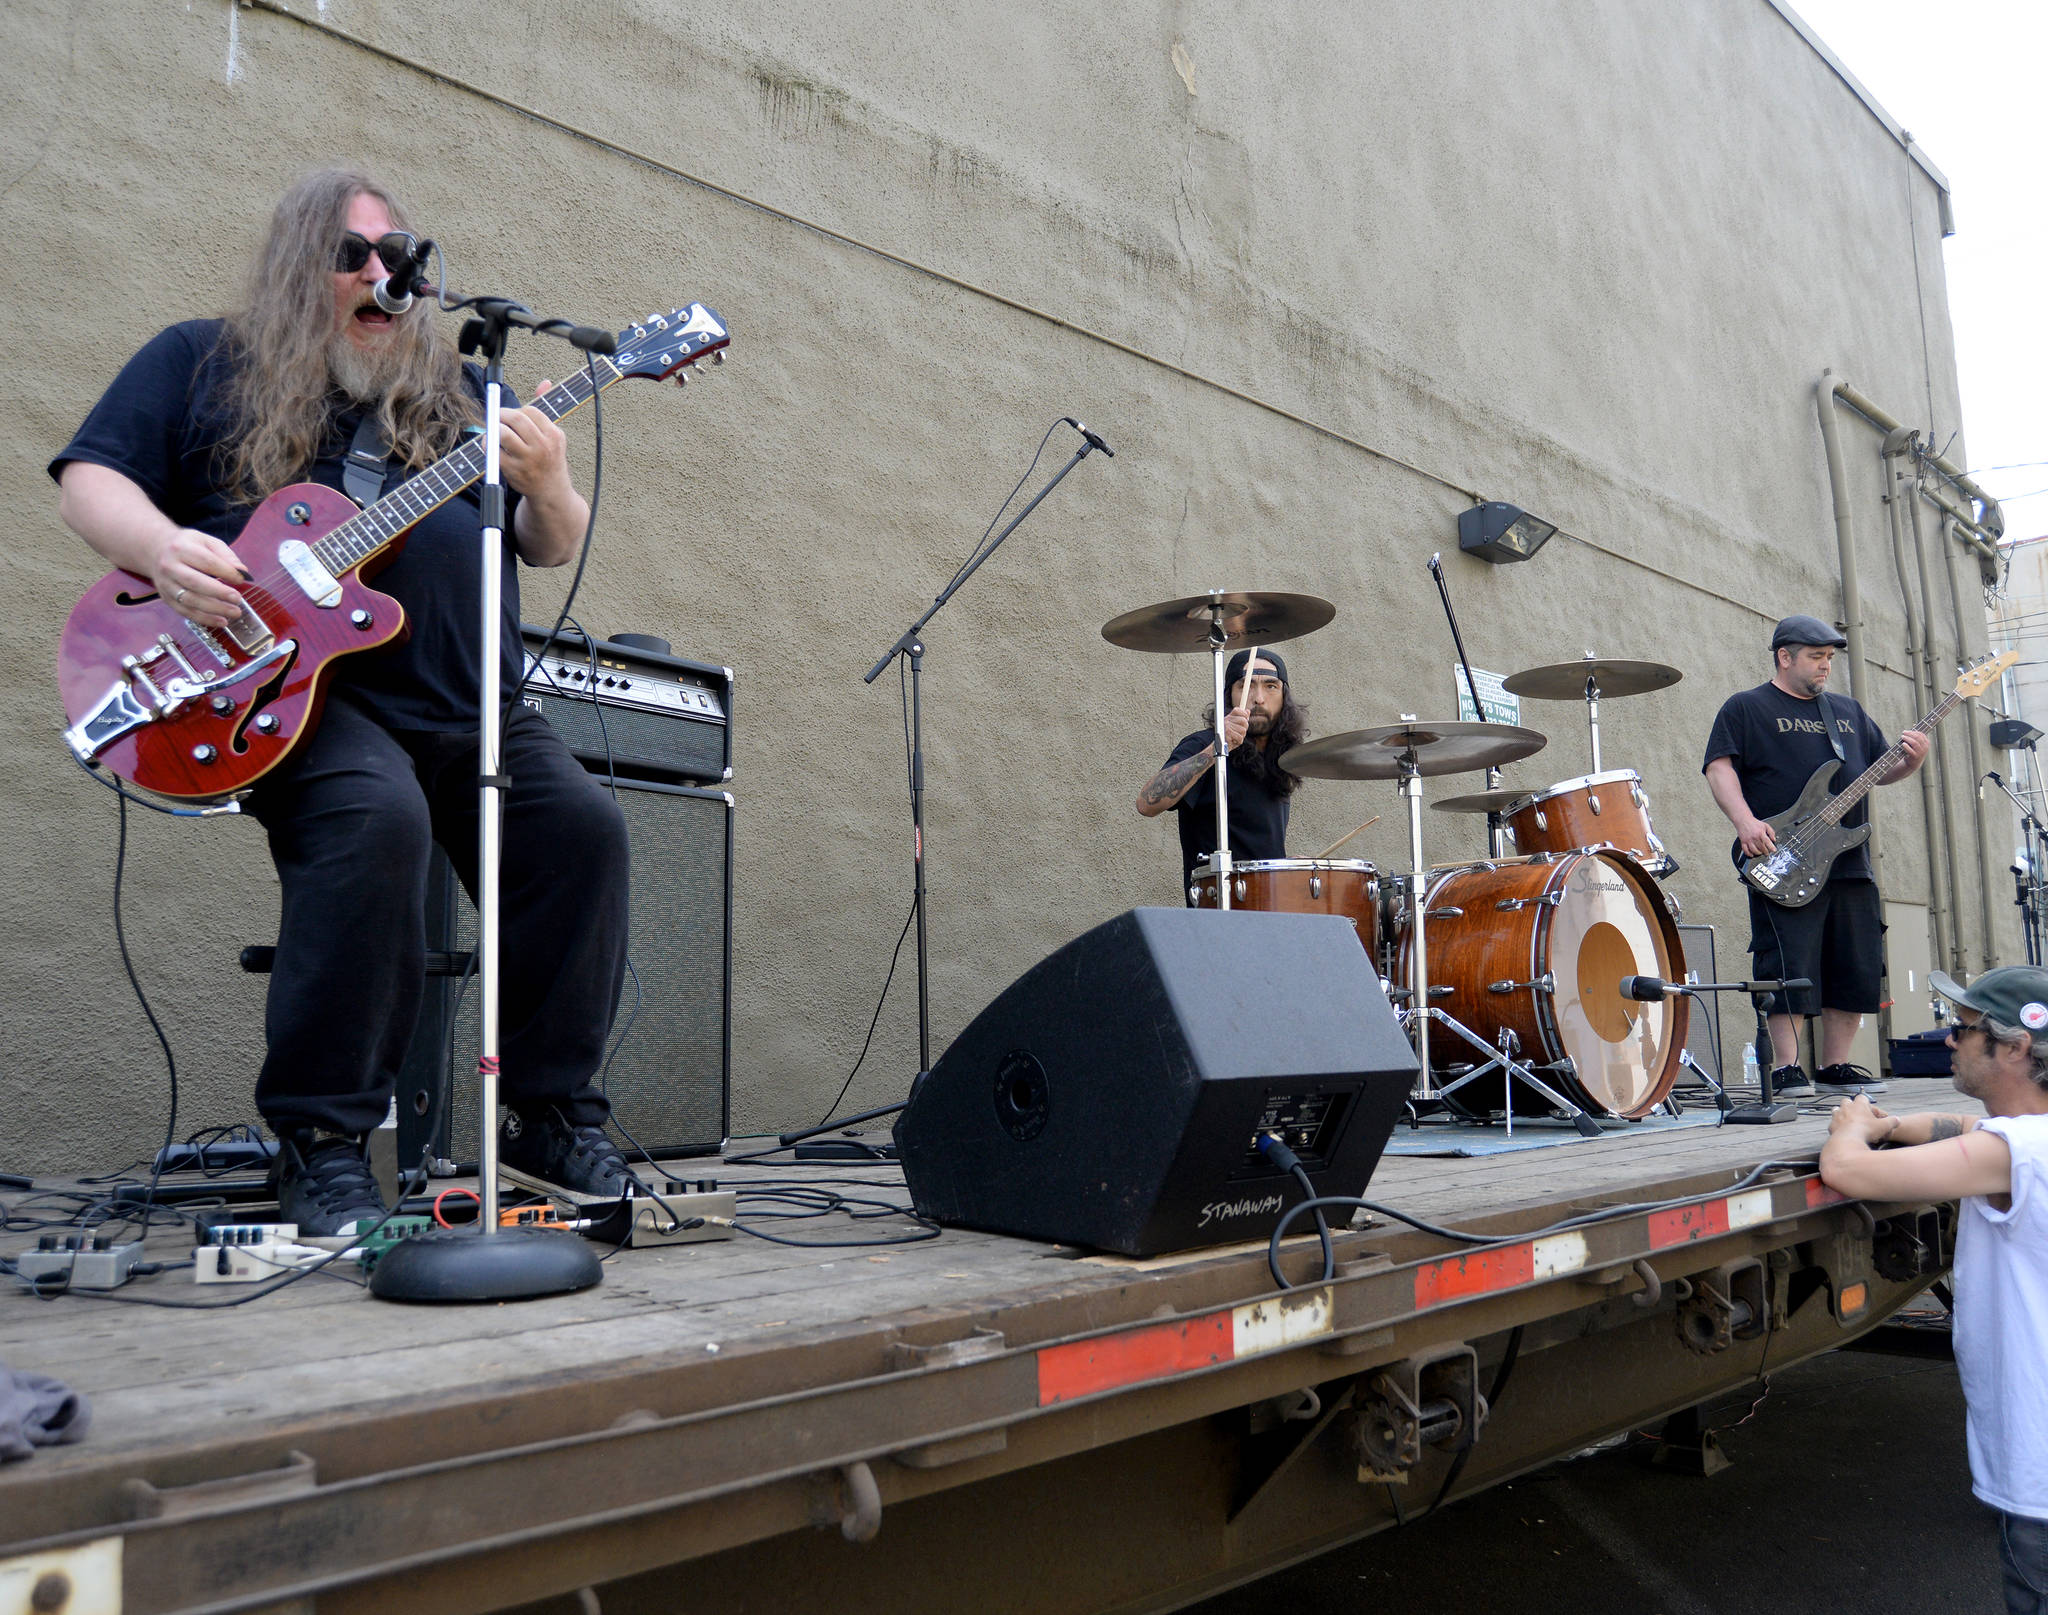 (Dan Hammock | The Daily World) Electric General, a metal band from Olympia, performs during the Pay to Play festival — formerly known as Kurt Cobain Days — Saturday afternoon. Pictured from left are guitarist/vocalist Luke Krom, drummer Jay Einspahr and John Calvin Bell on bass. Ten bands were slated to play starting at 11 a.m. Saturday in the alley behind Boomtown Records on East Wishkah in Aberdeen.